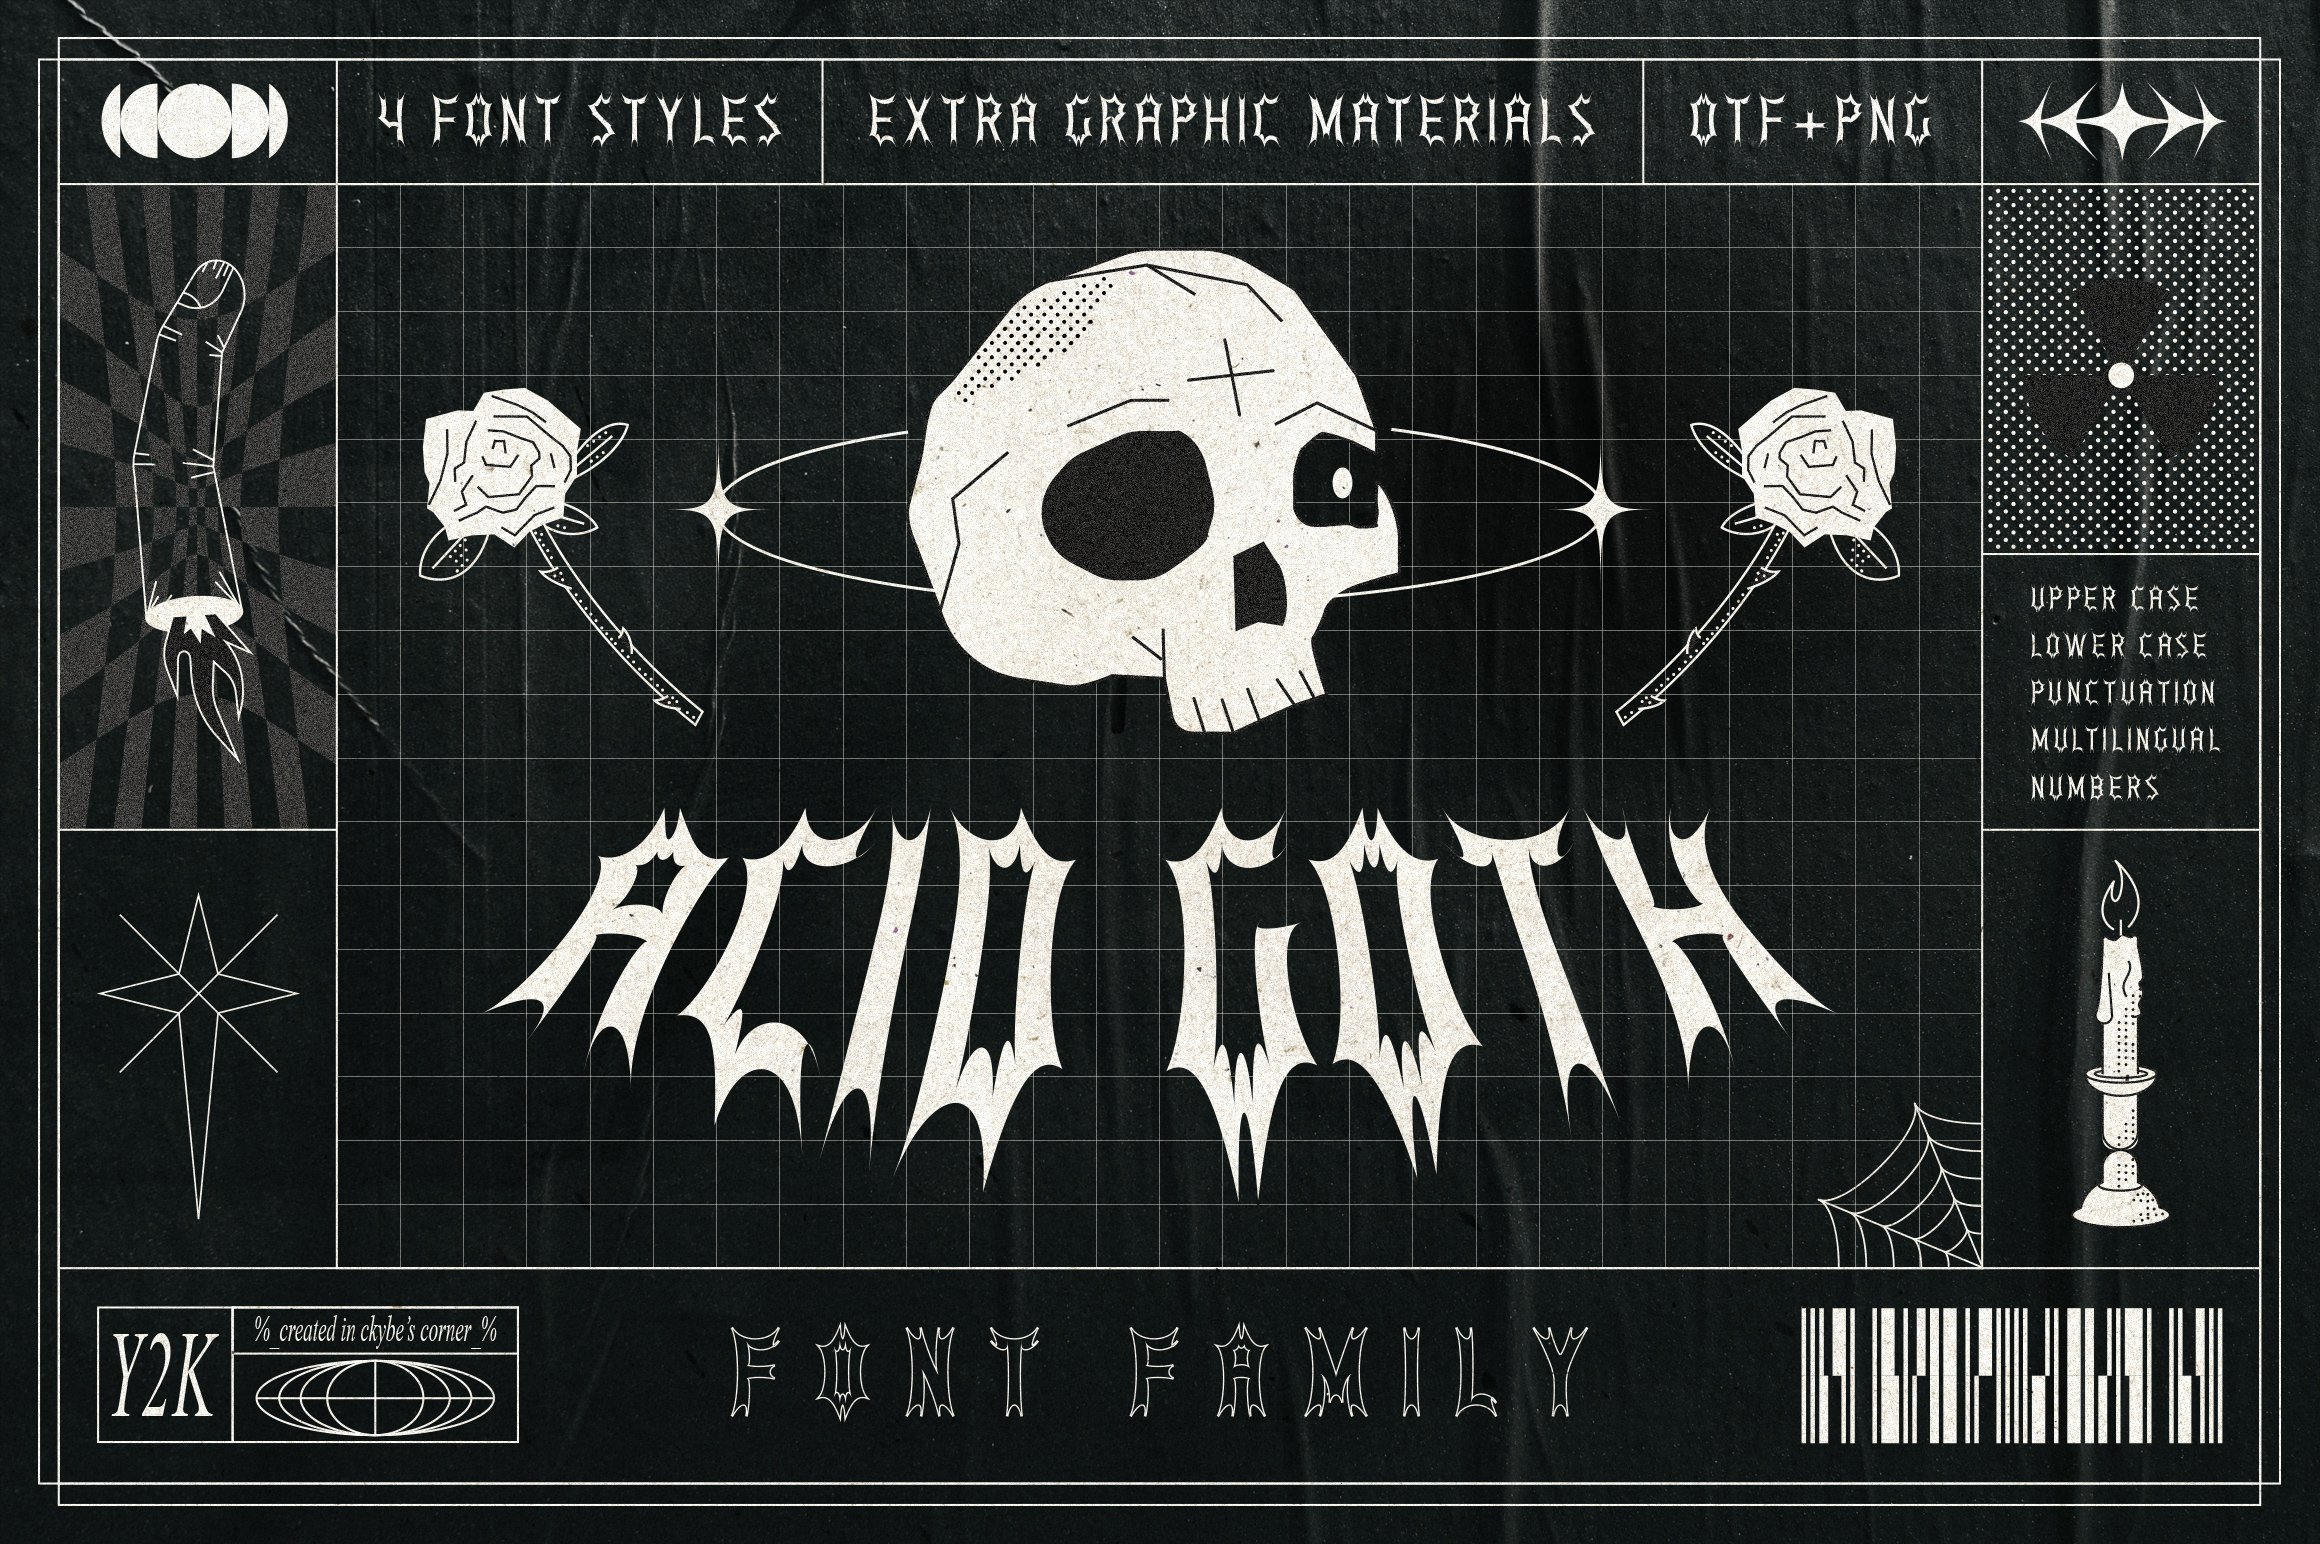 Acid Goth | Font Family cover image.